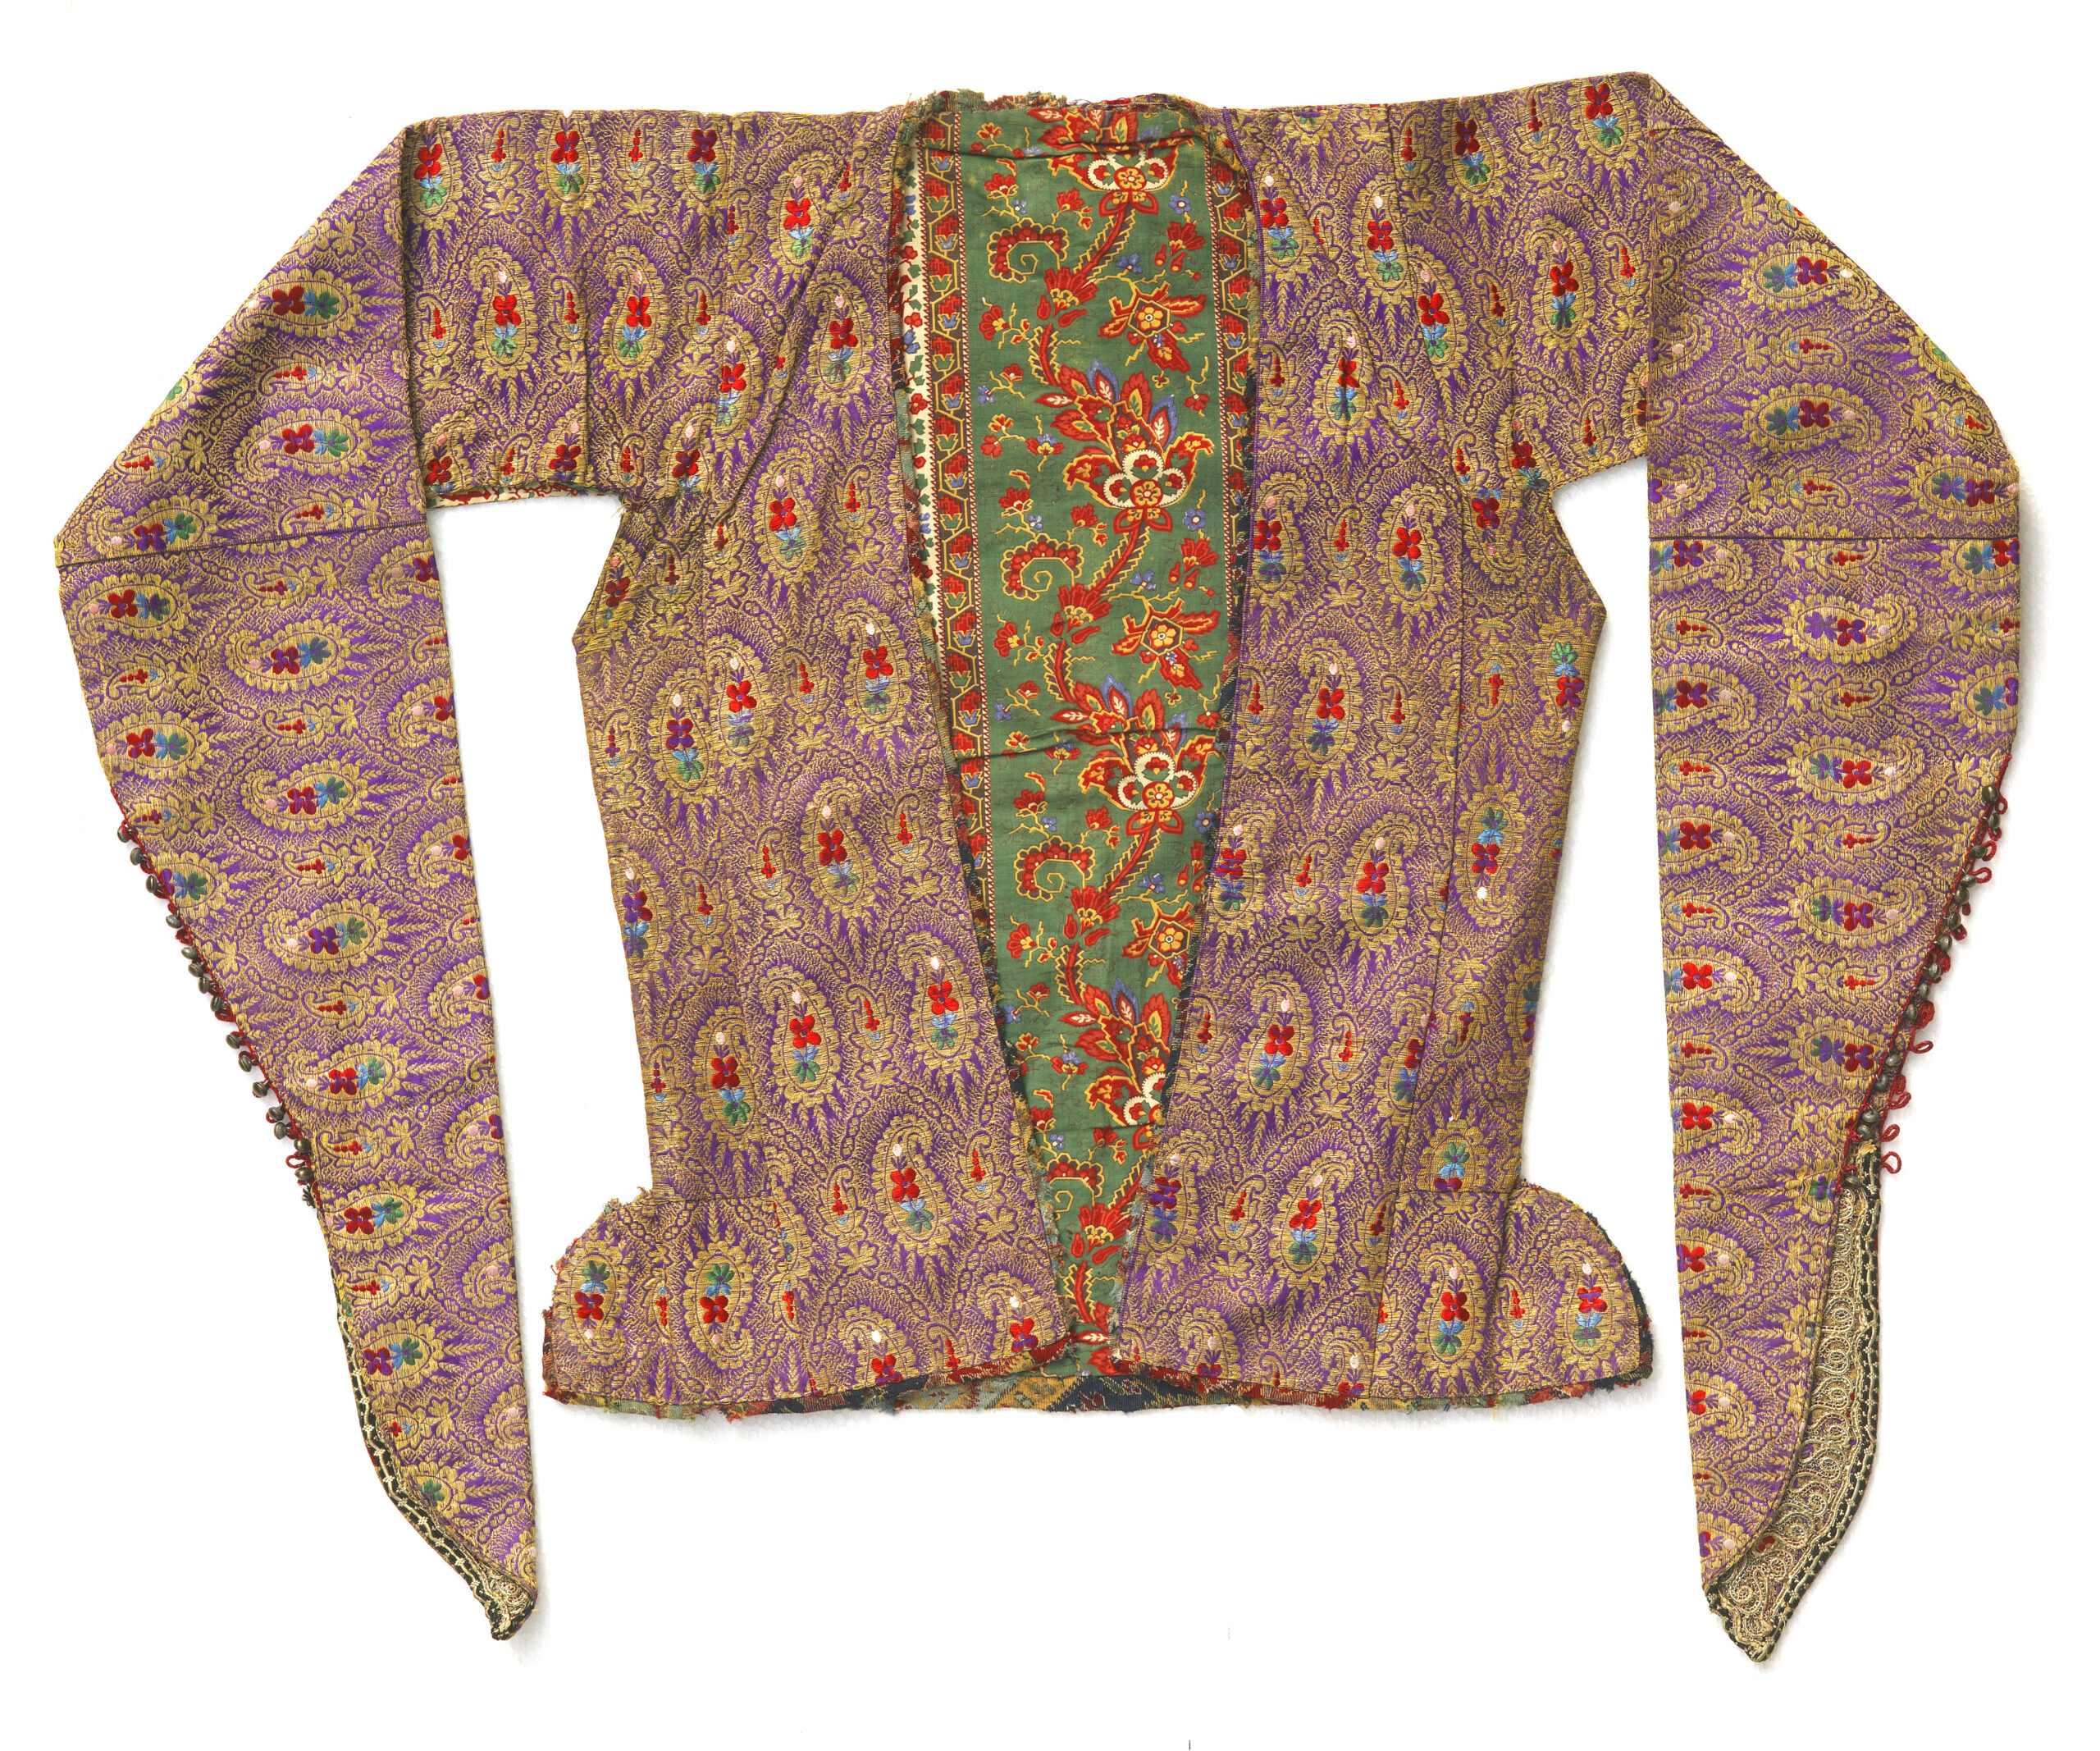 1 Woman’s jacket, Esfahan, Iran, mid-19th century. Zarbaft silk woven with a design of repeated boteh motifs and a printed cotton lining imported from Russia or England. Silk, gold thread, sleeve ends with tiny buttons, trimmed with gold lace. All images, The Ramezani Family Collection